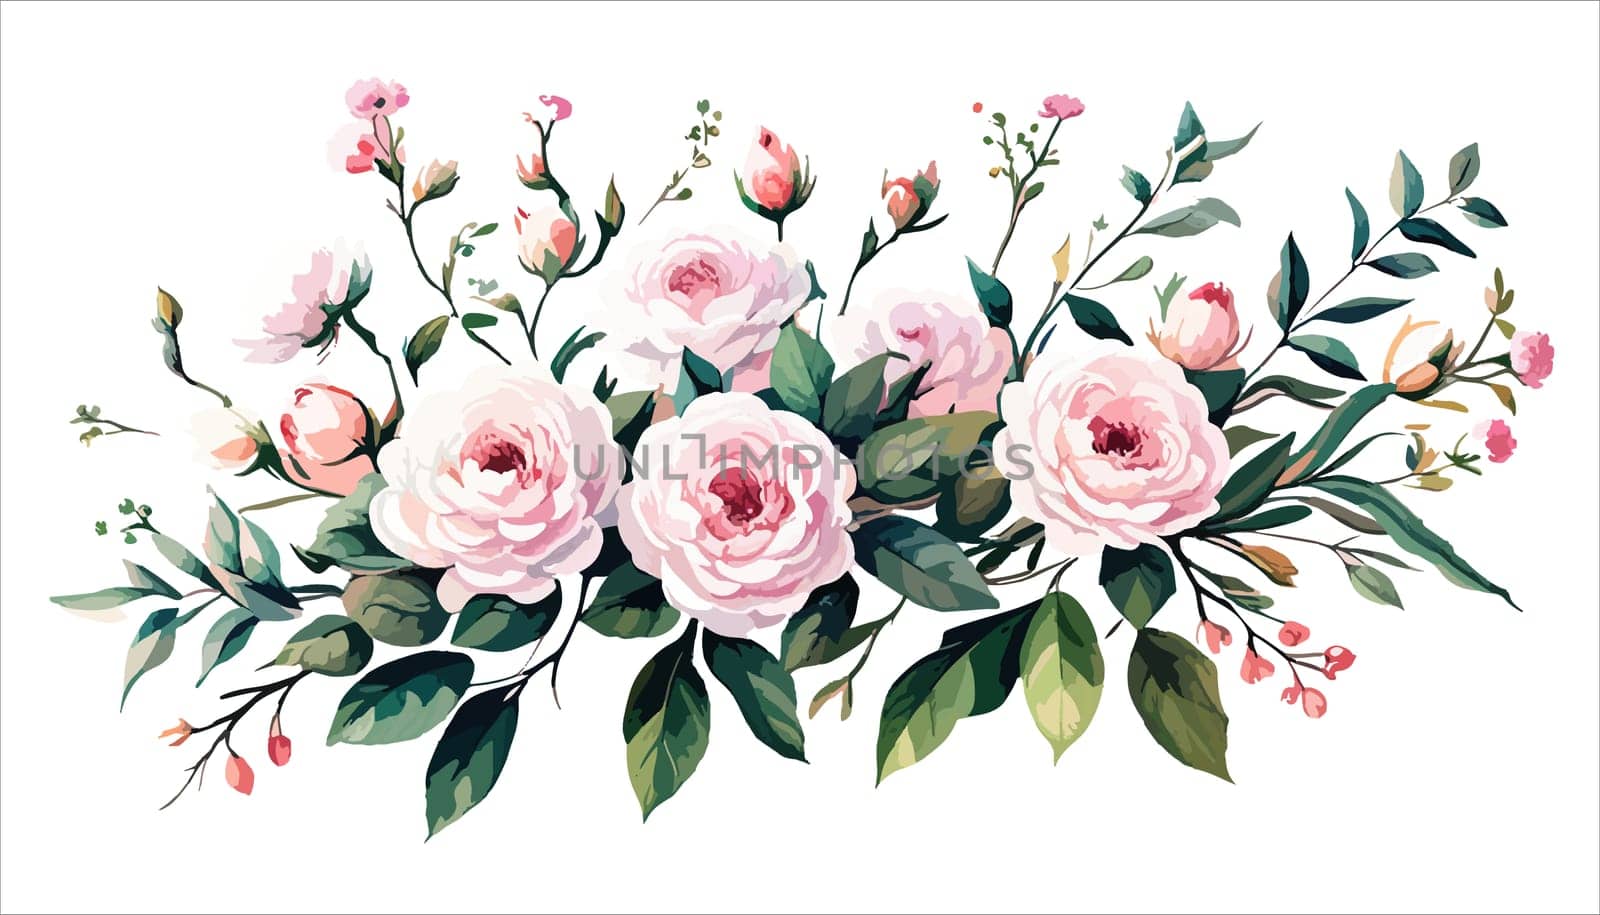 Blooming flowers pink roses for your design. Spring, summer wedding romantic elegant date marriage symbol. Bouquet for your template, design of invitation card. illustration